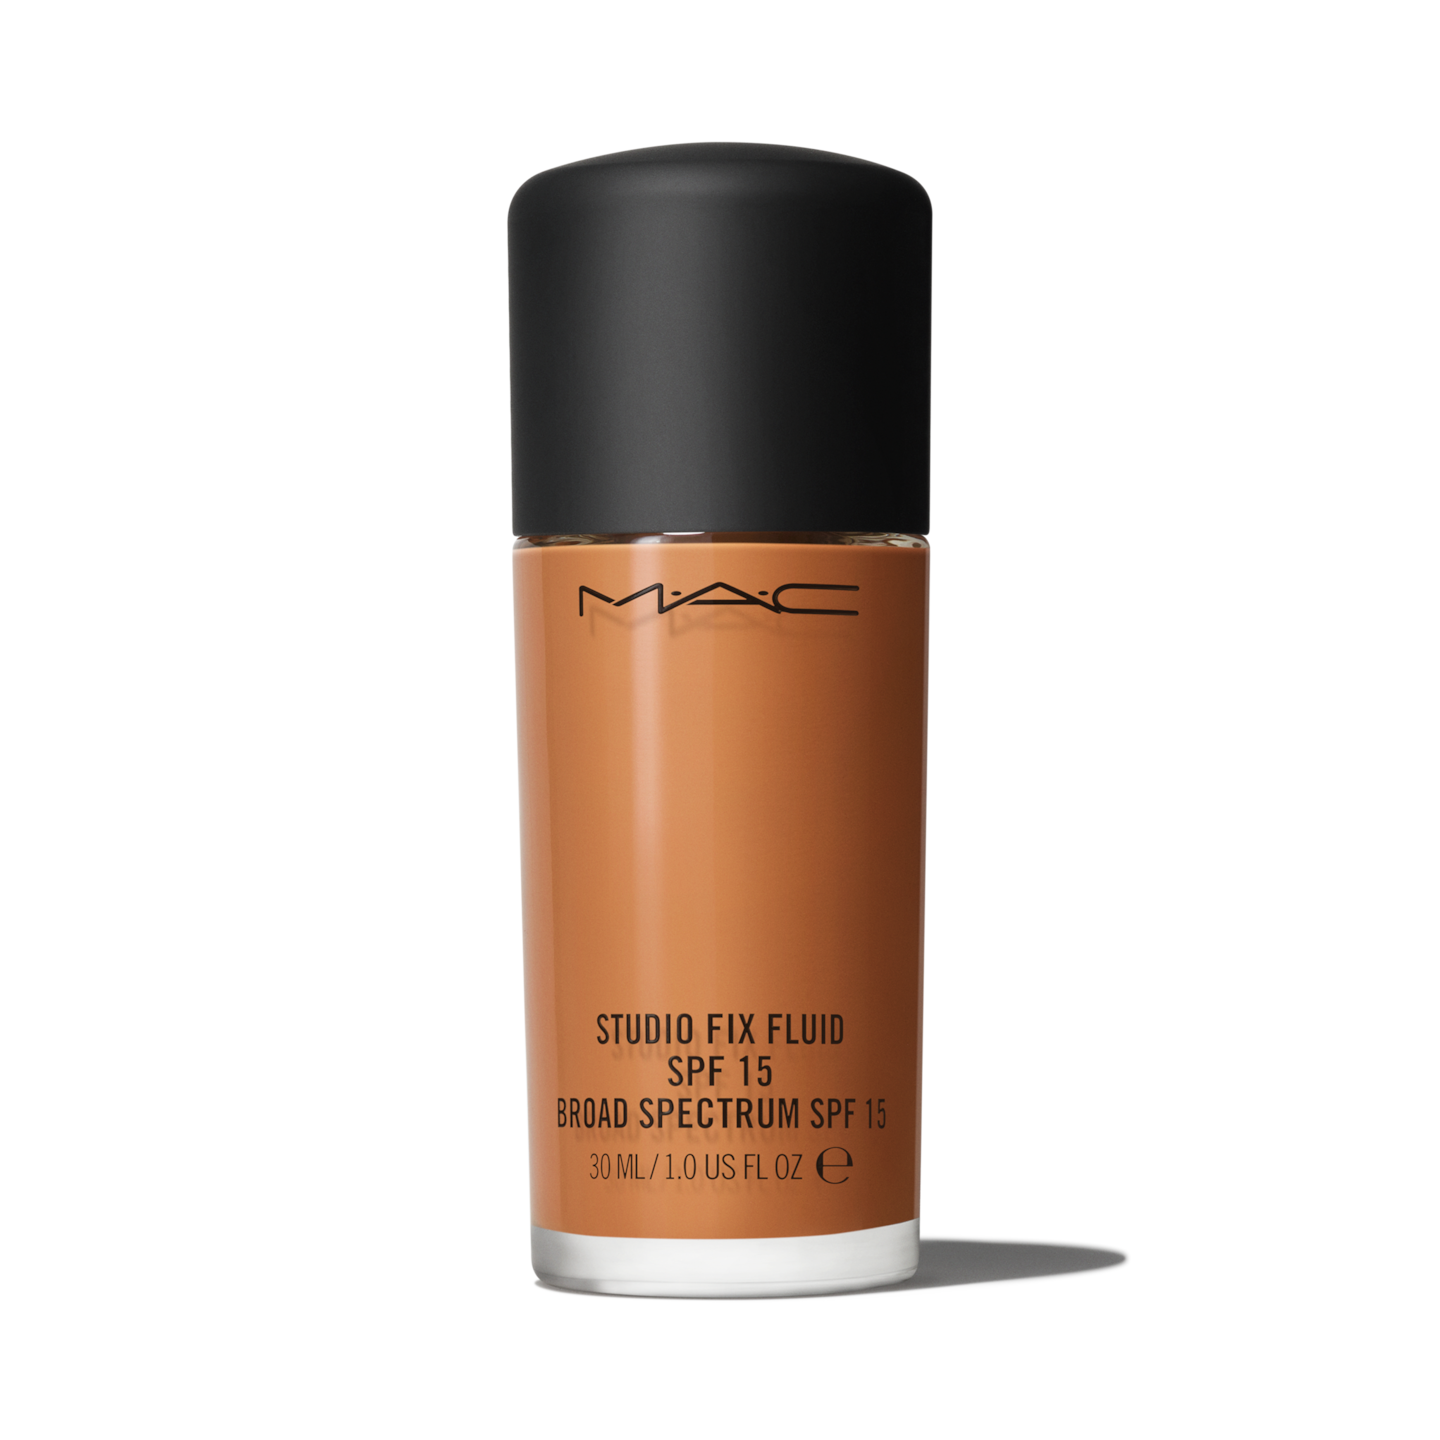 Studio Fix Fluid Foundation with SPF 15 | 63 Shades Including NC20 | MAC  Cosmetics - Official Site